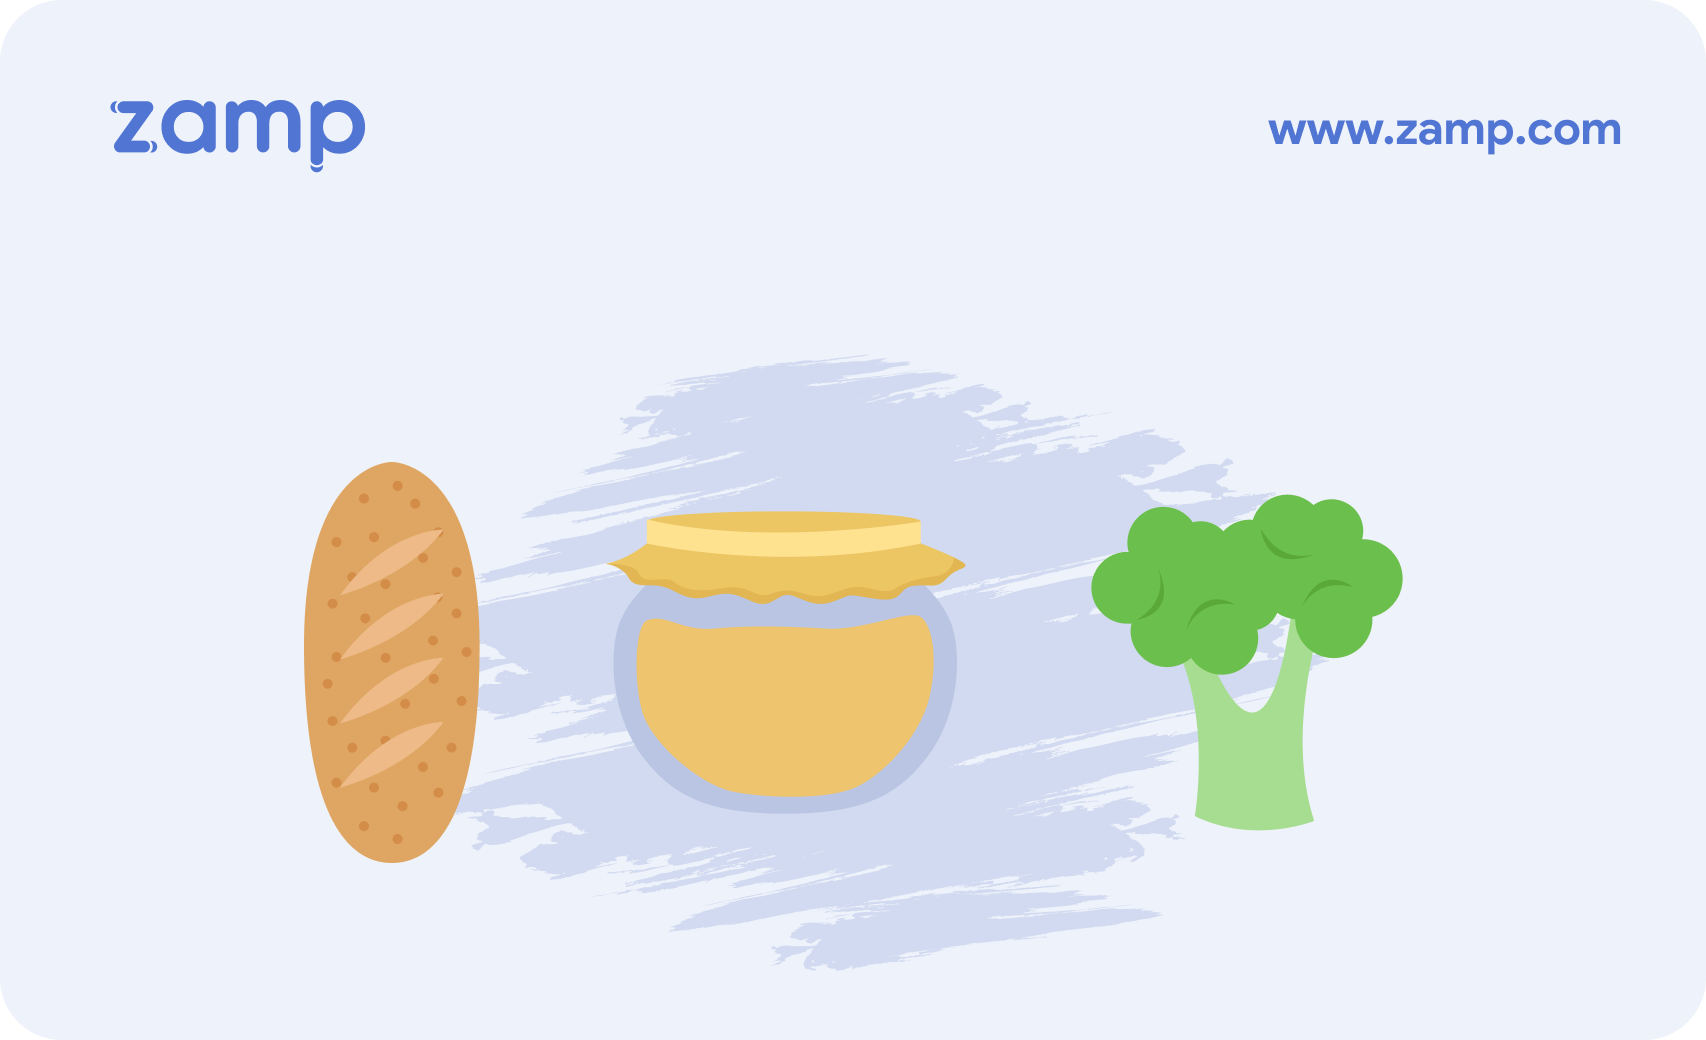 Article header images of stylized bread, honey and broccoli